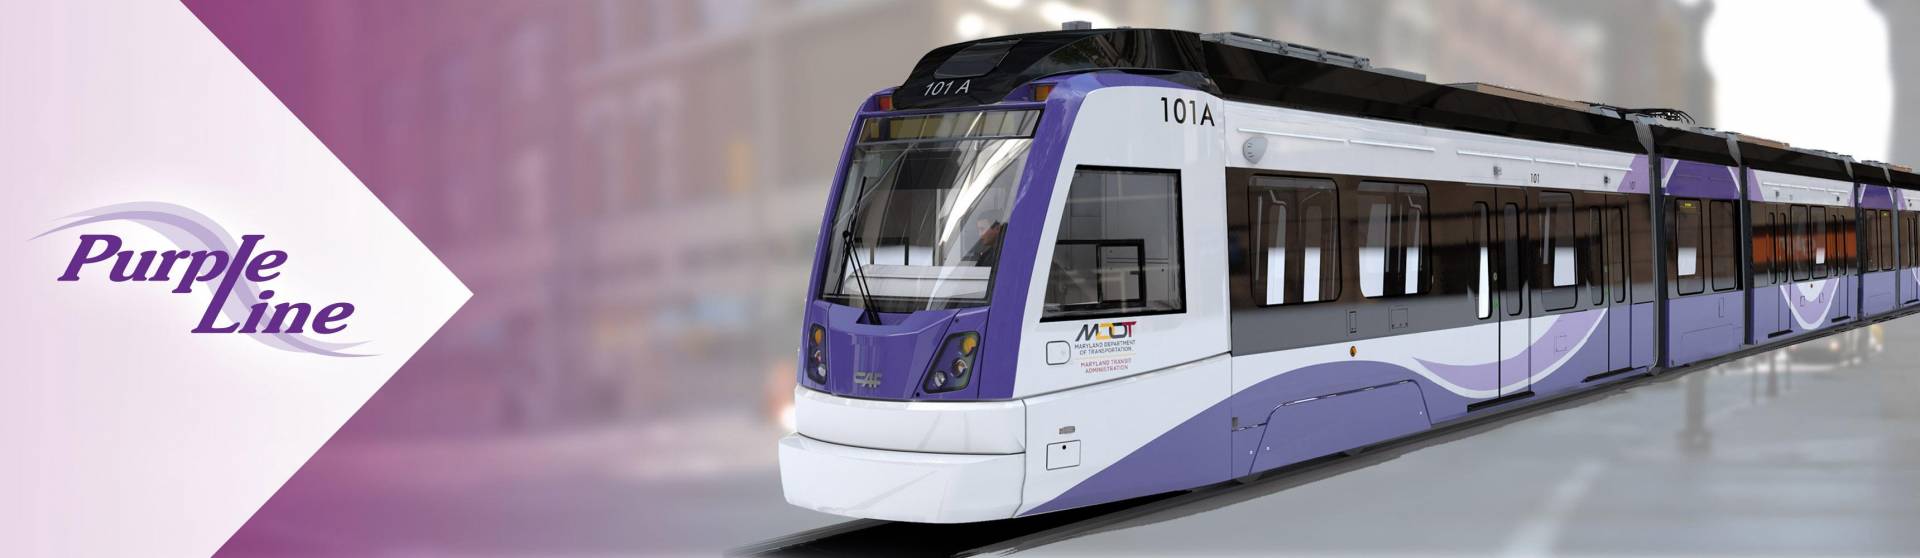 Purple Line train rendering in city setting. Purple Line logo to left of image.